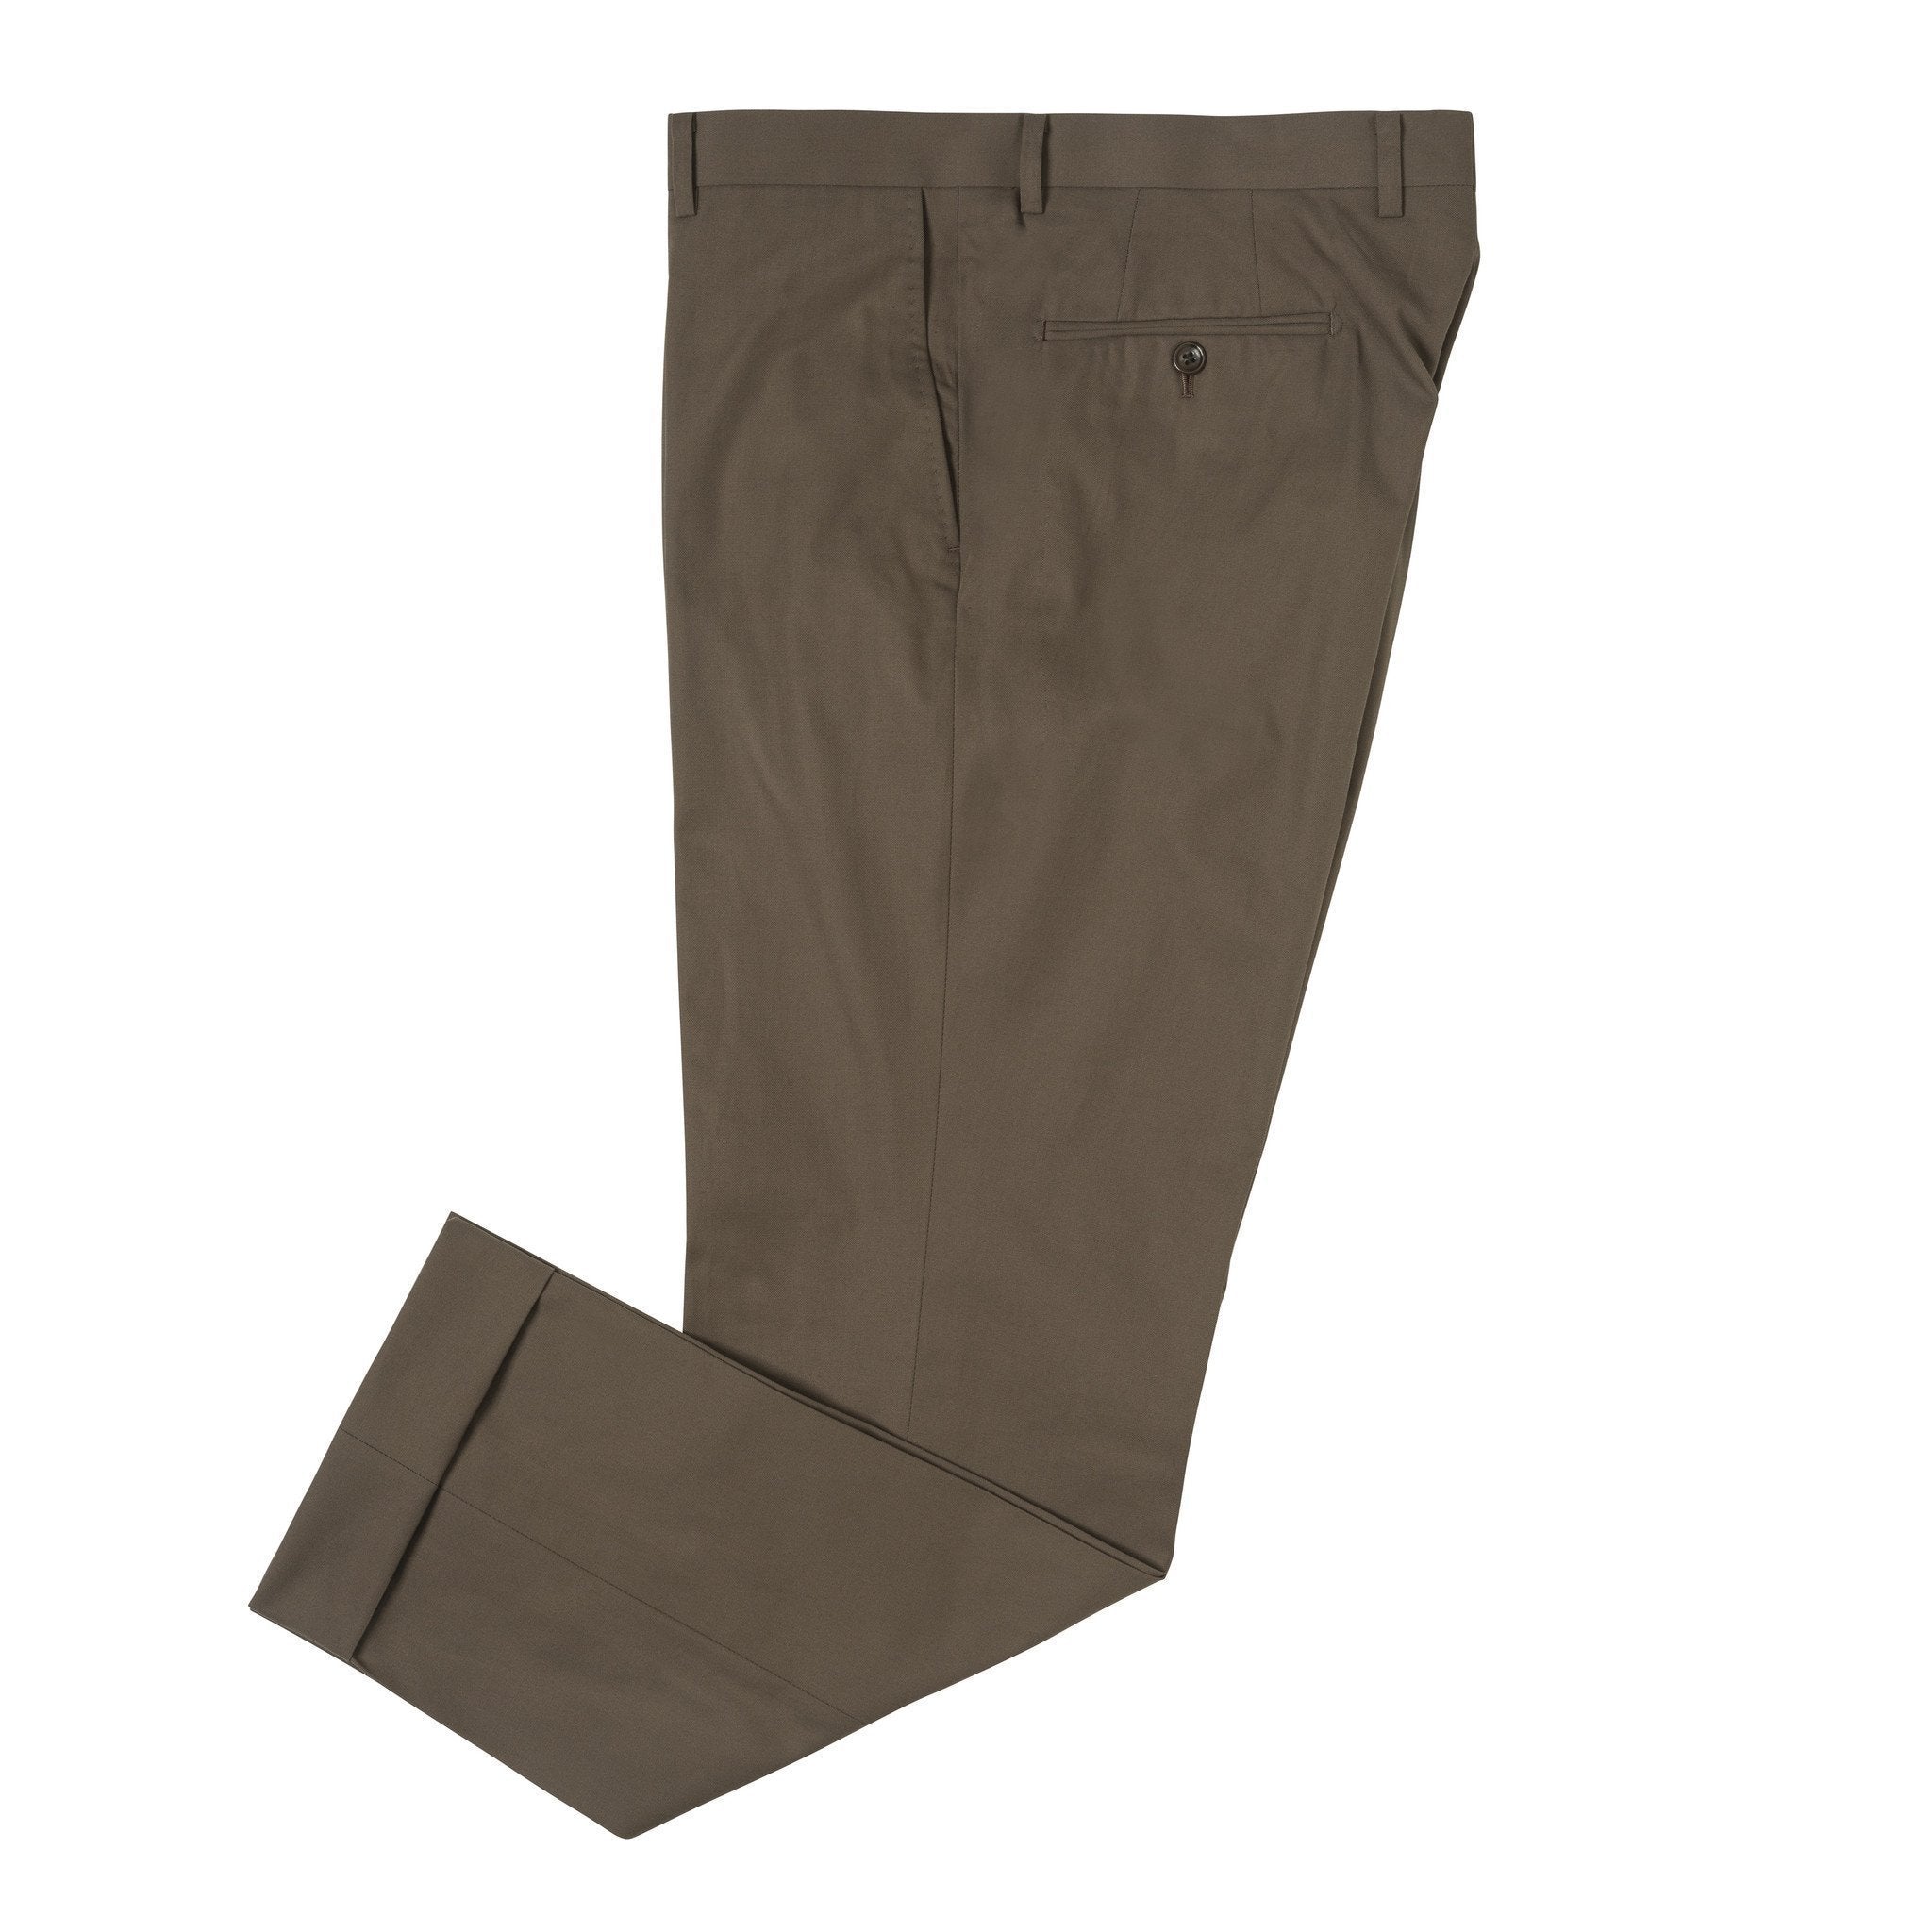 Model A Cotton Trousers - The Armoury